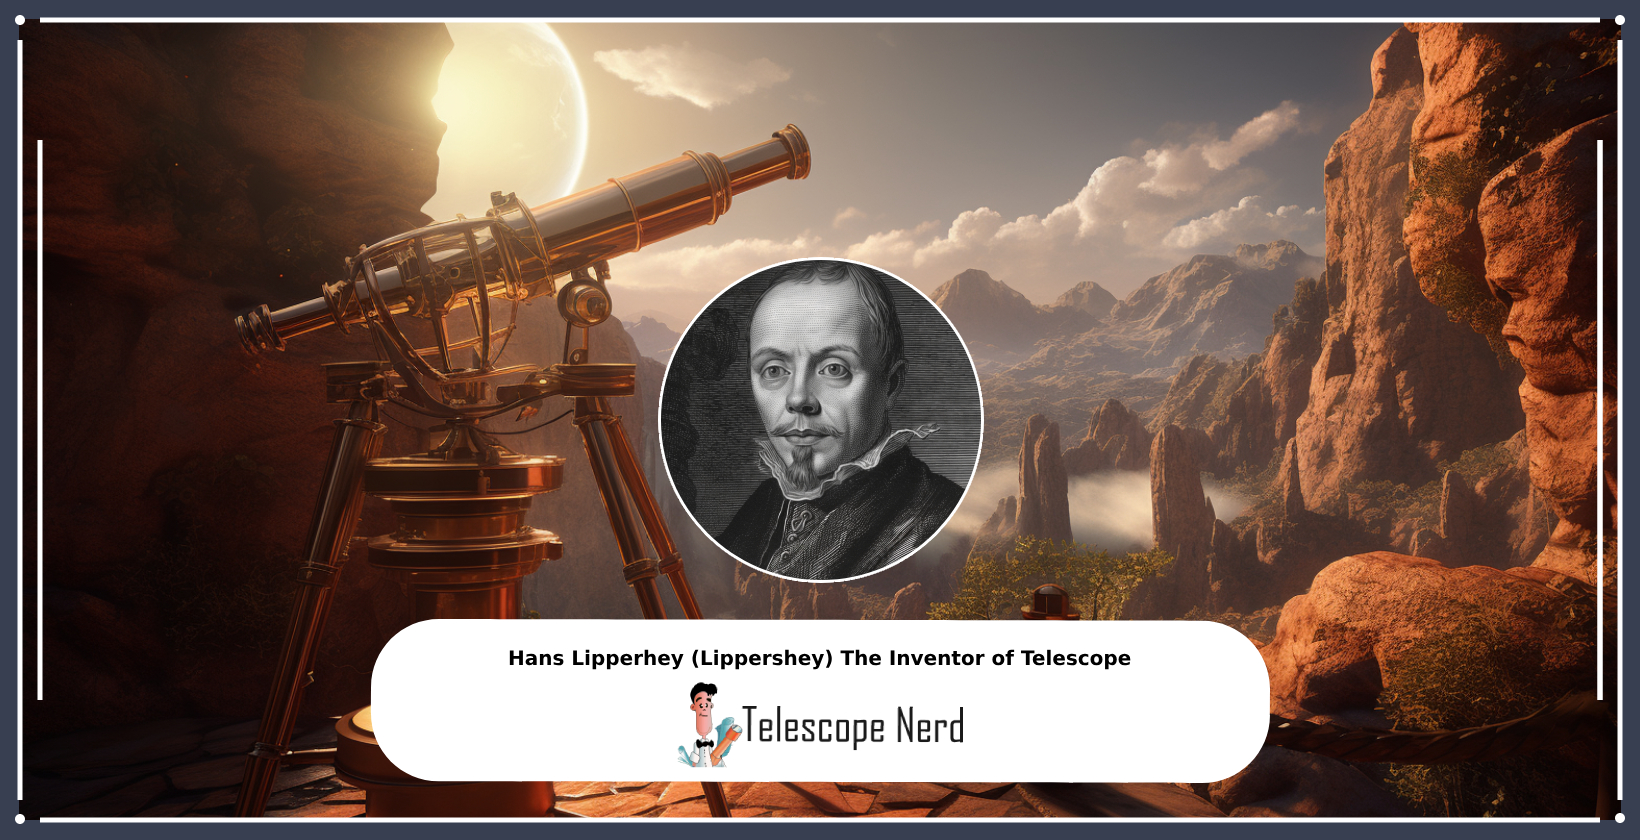 Hand Lipperhey (Lippershey) and his invention of a telescope